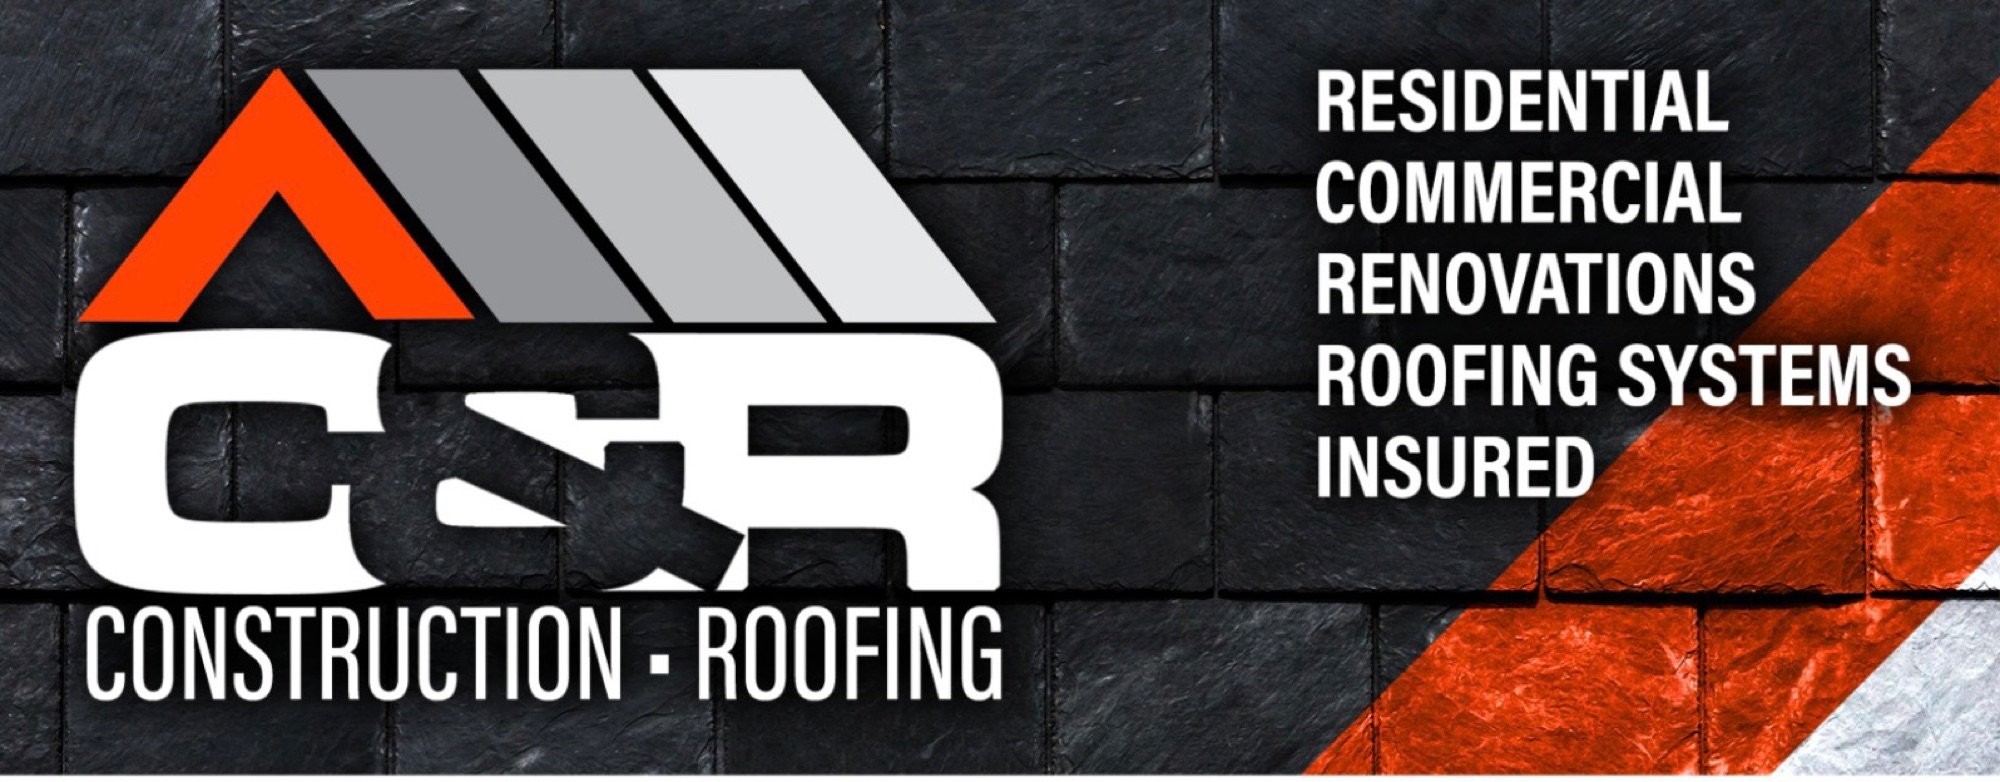 C&R Construction & Roofing Logo